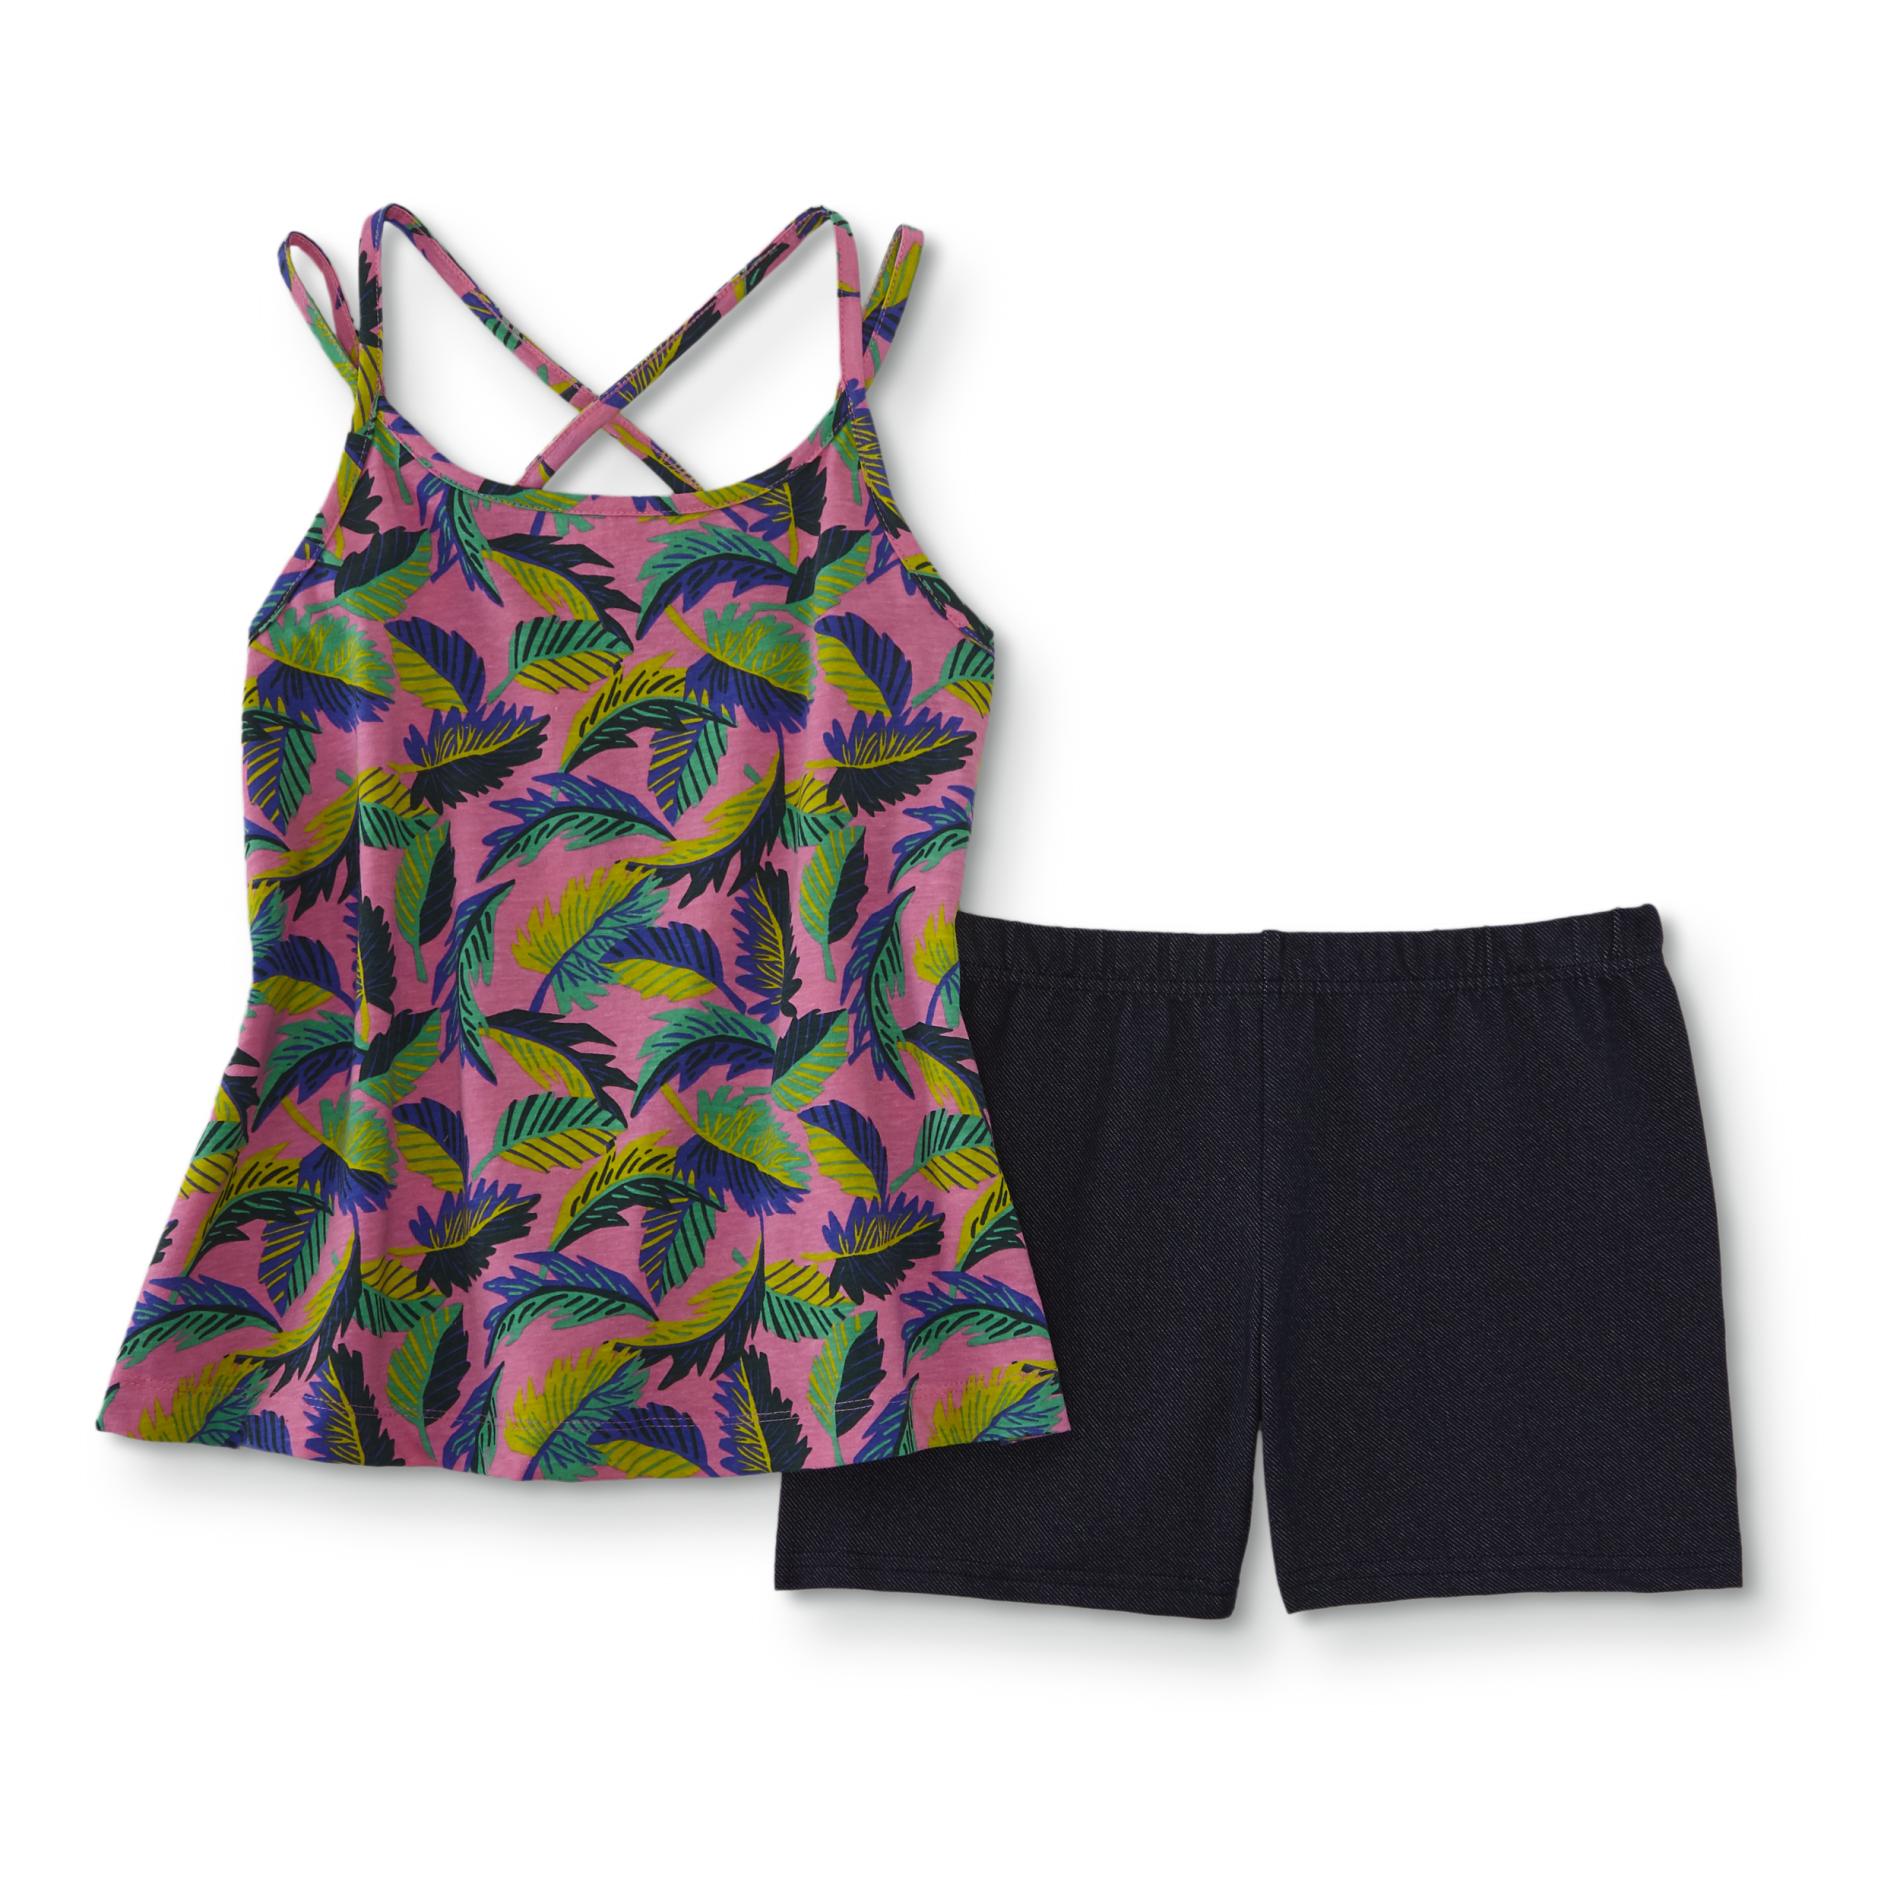 Simply Styled Girls' Plus Tank Top & Knit Shorts - Palm Leaves